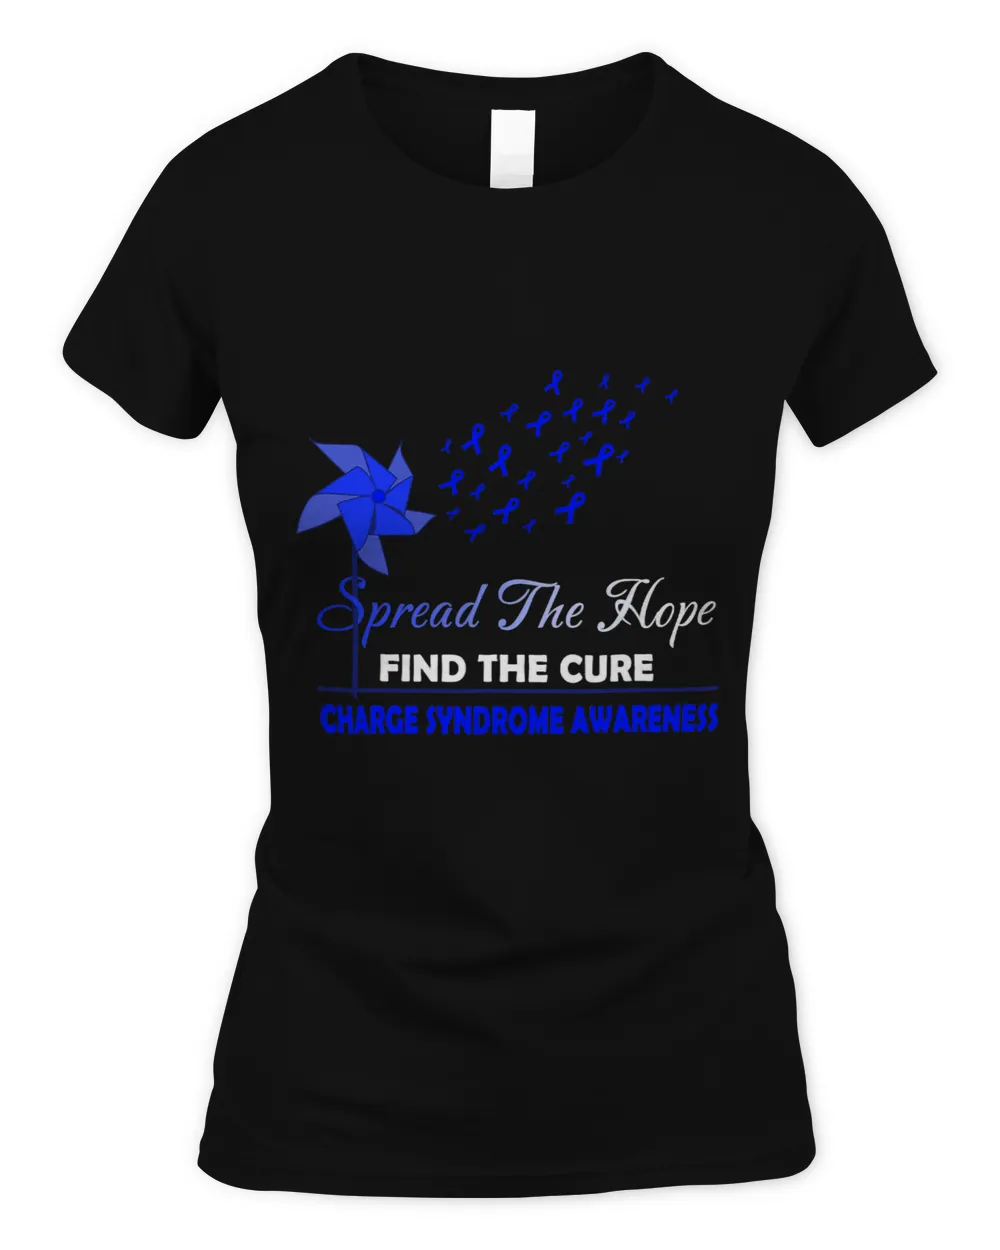 SPREAD THE HOPE CHARGE SYNDROME AWARENESS